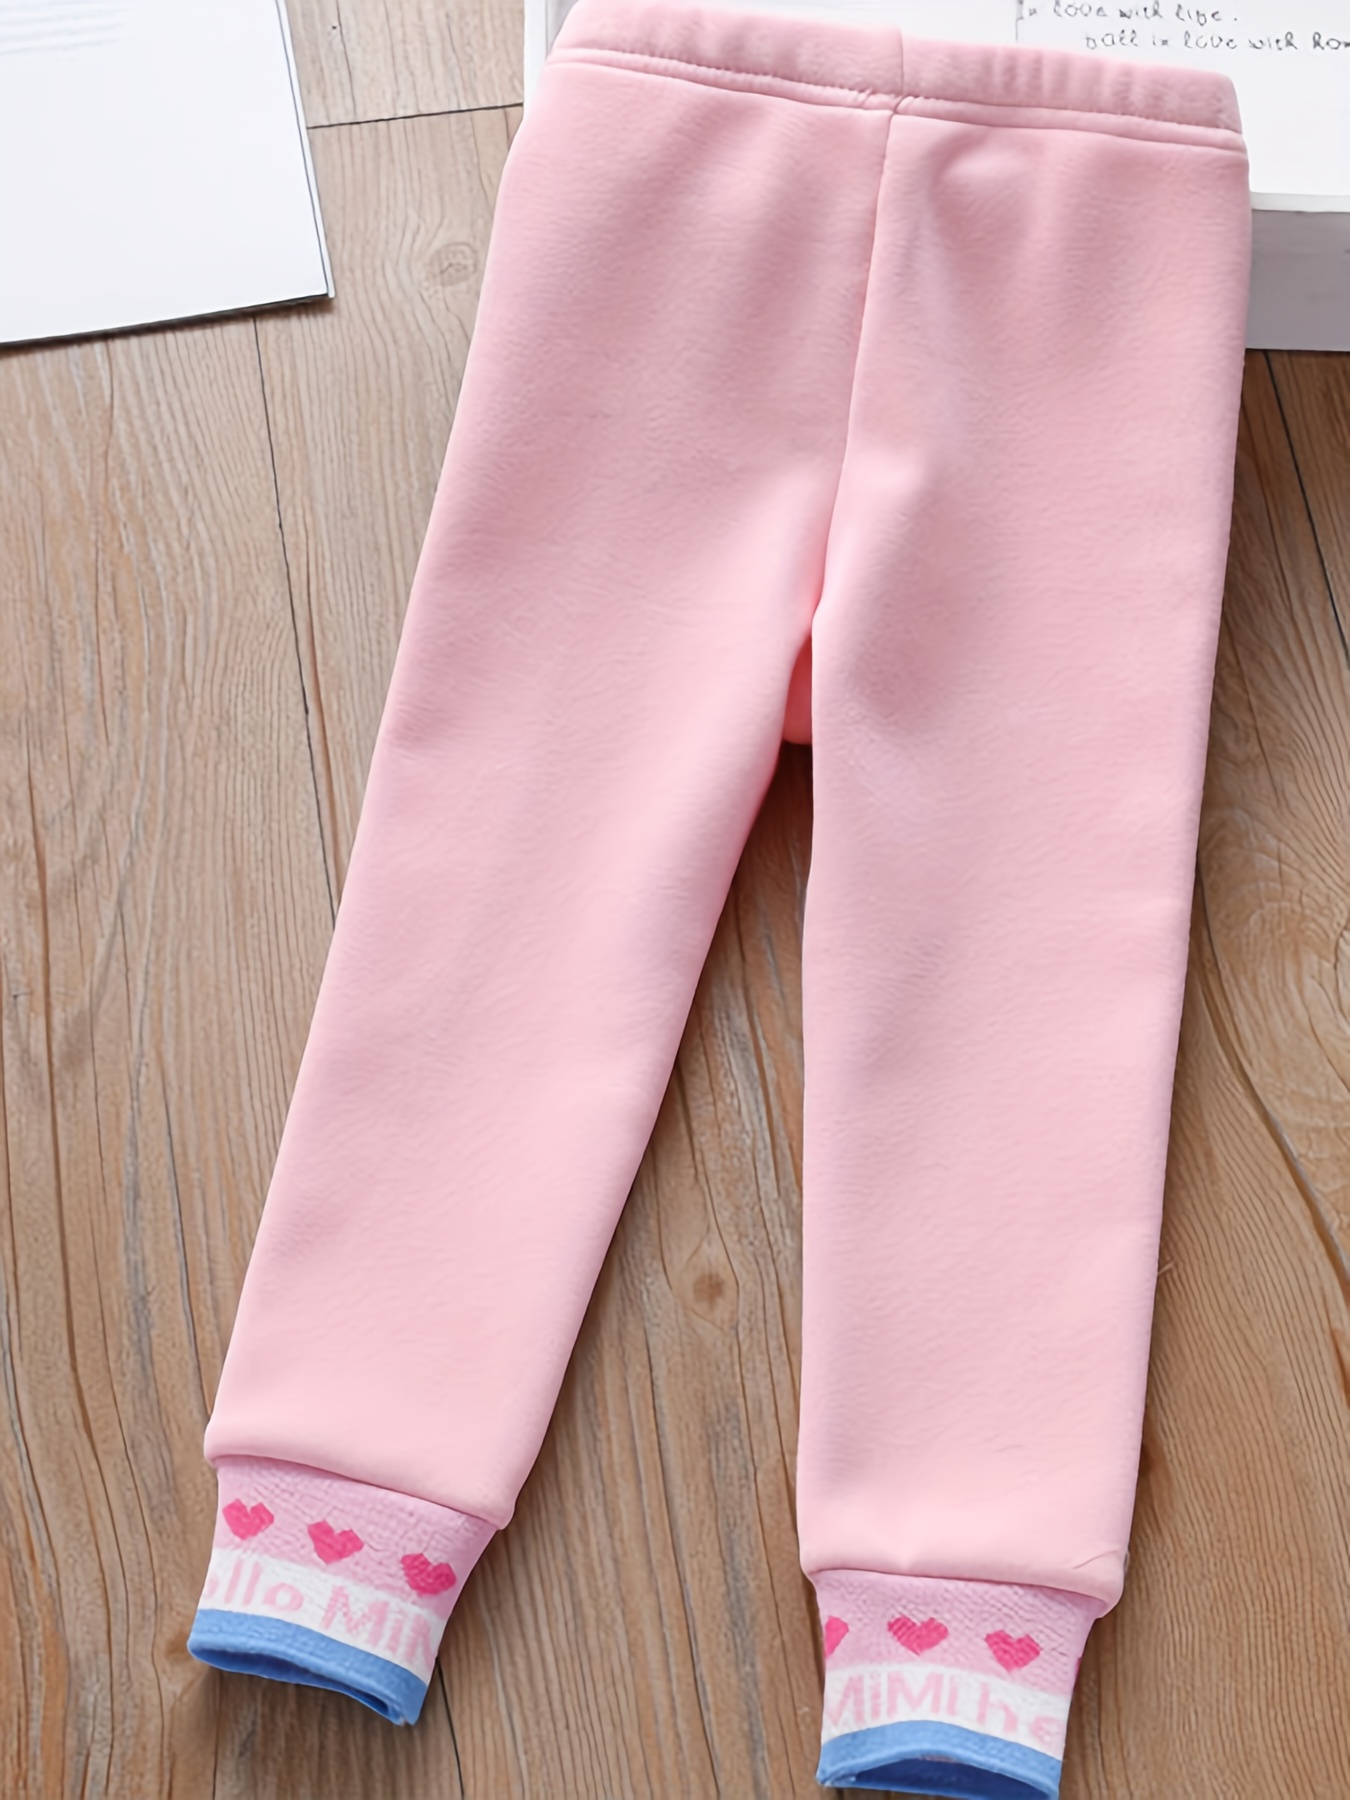 Spring Girls Letter Leggings Kids Sweatpants 0-6Y Young Child Casual  Clothes Autumn Baby Solid Skinny Trousers Thin Tights Pants - AliExpress